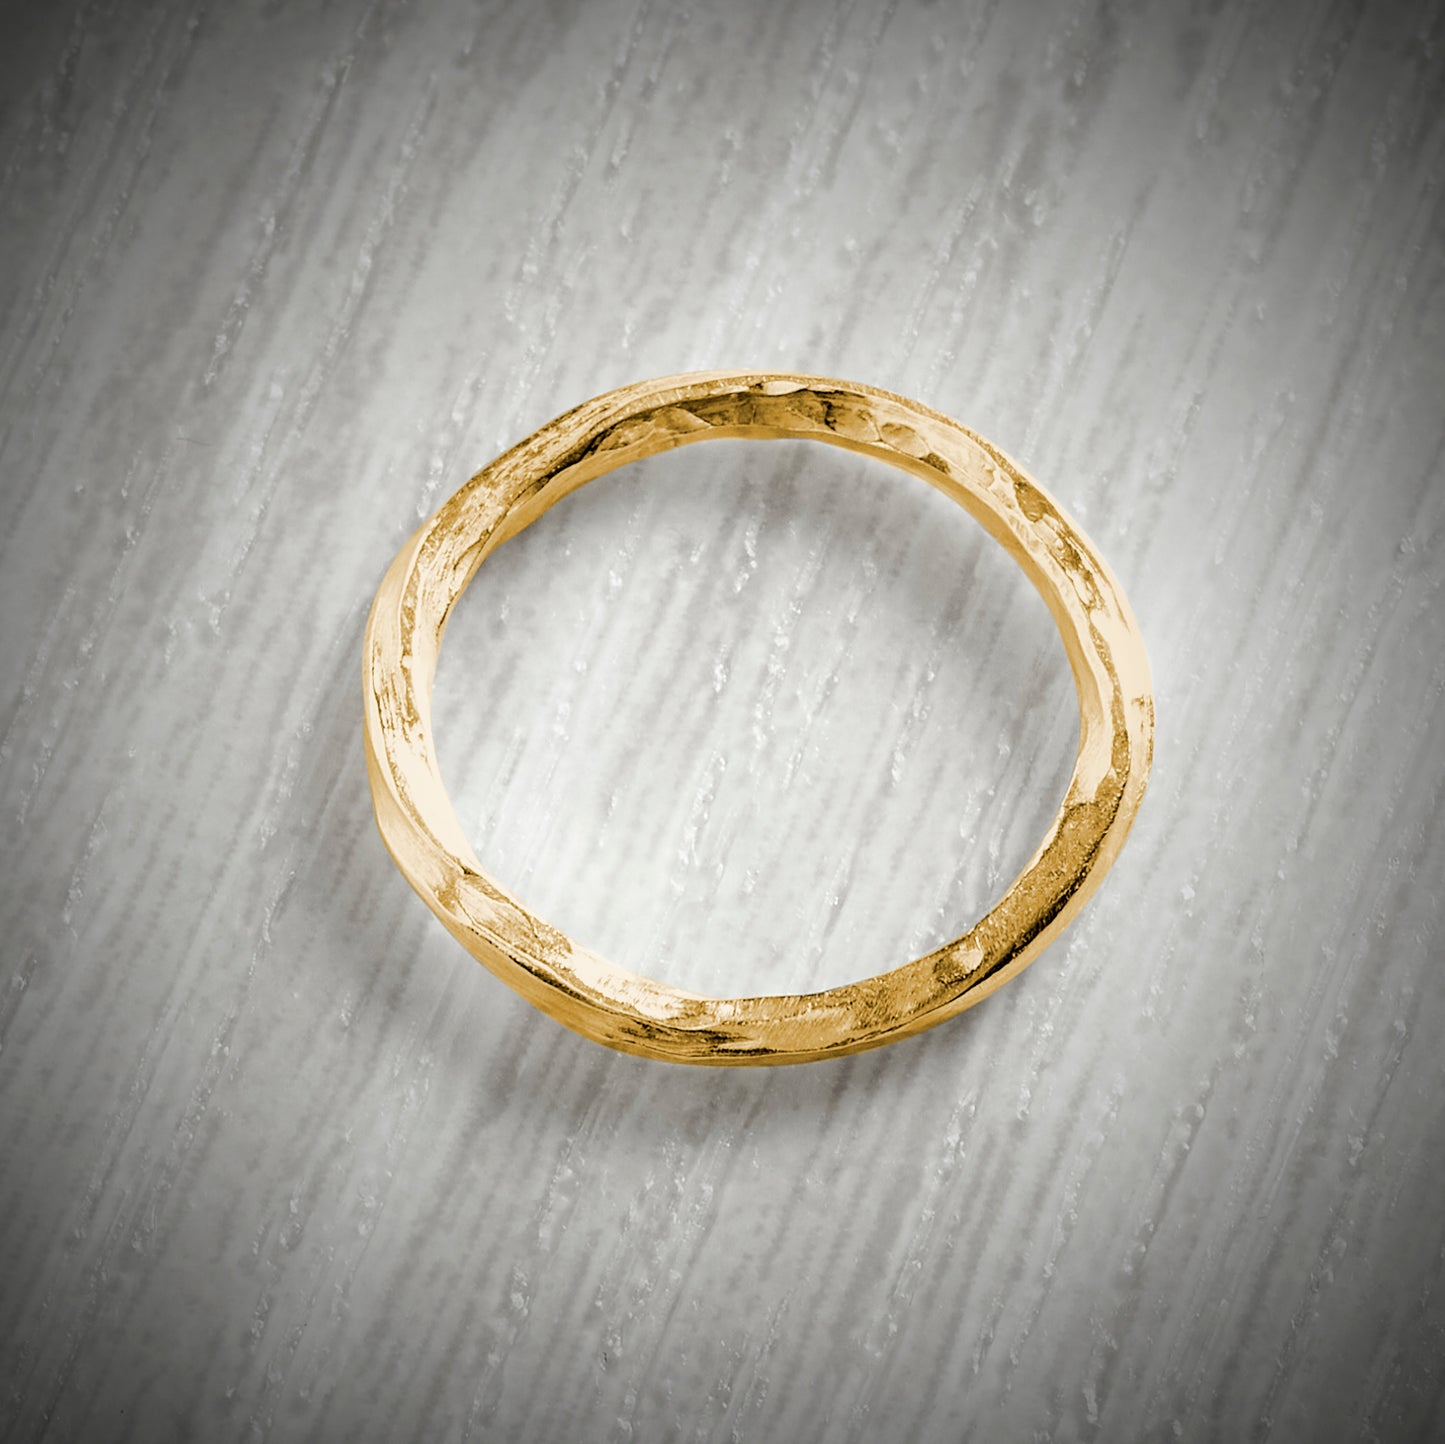 Solid Gold Slimline Twisted Ring by Emma White